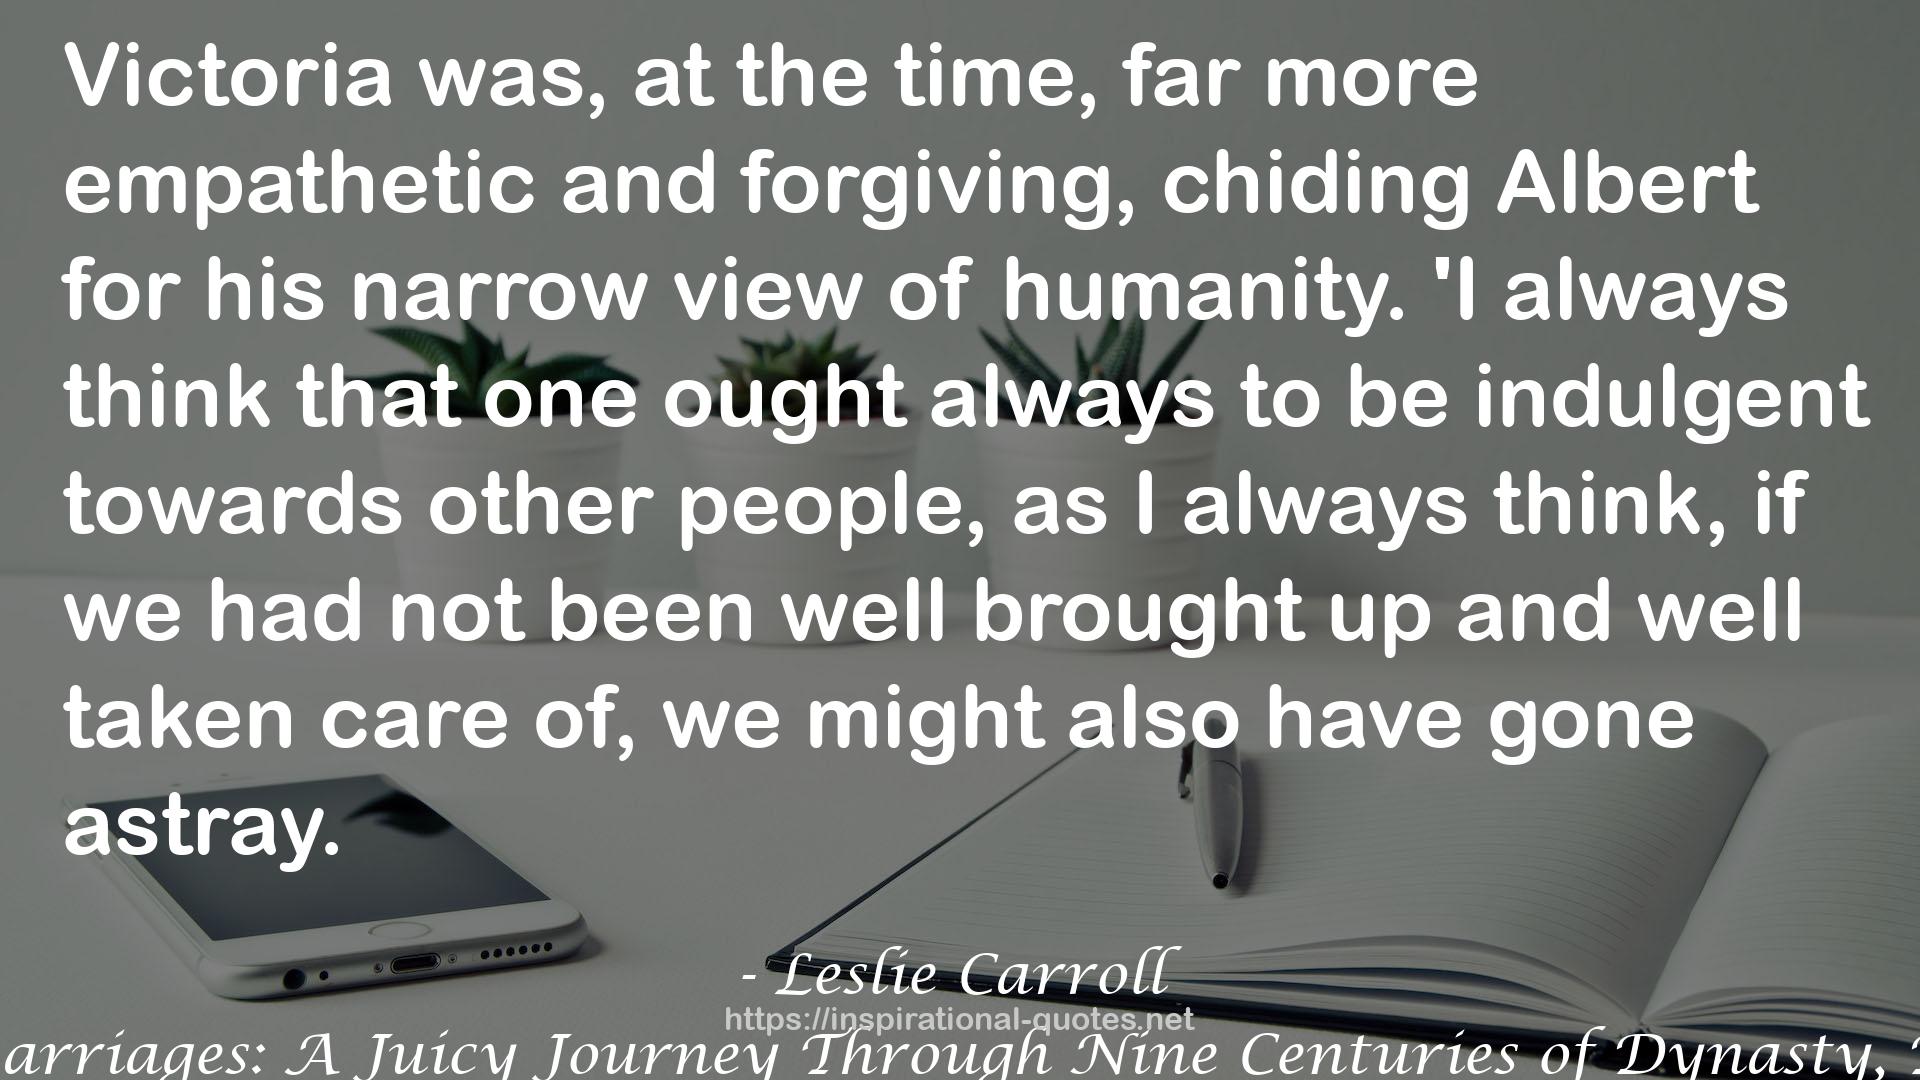 Leslie Carroll QUOTES